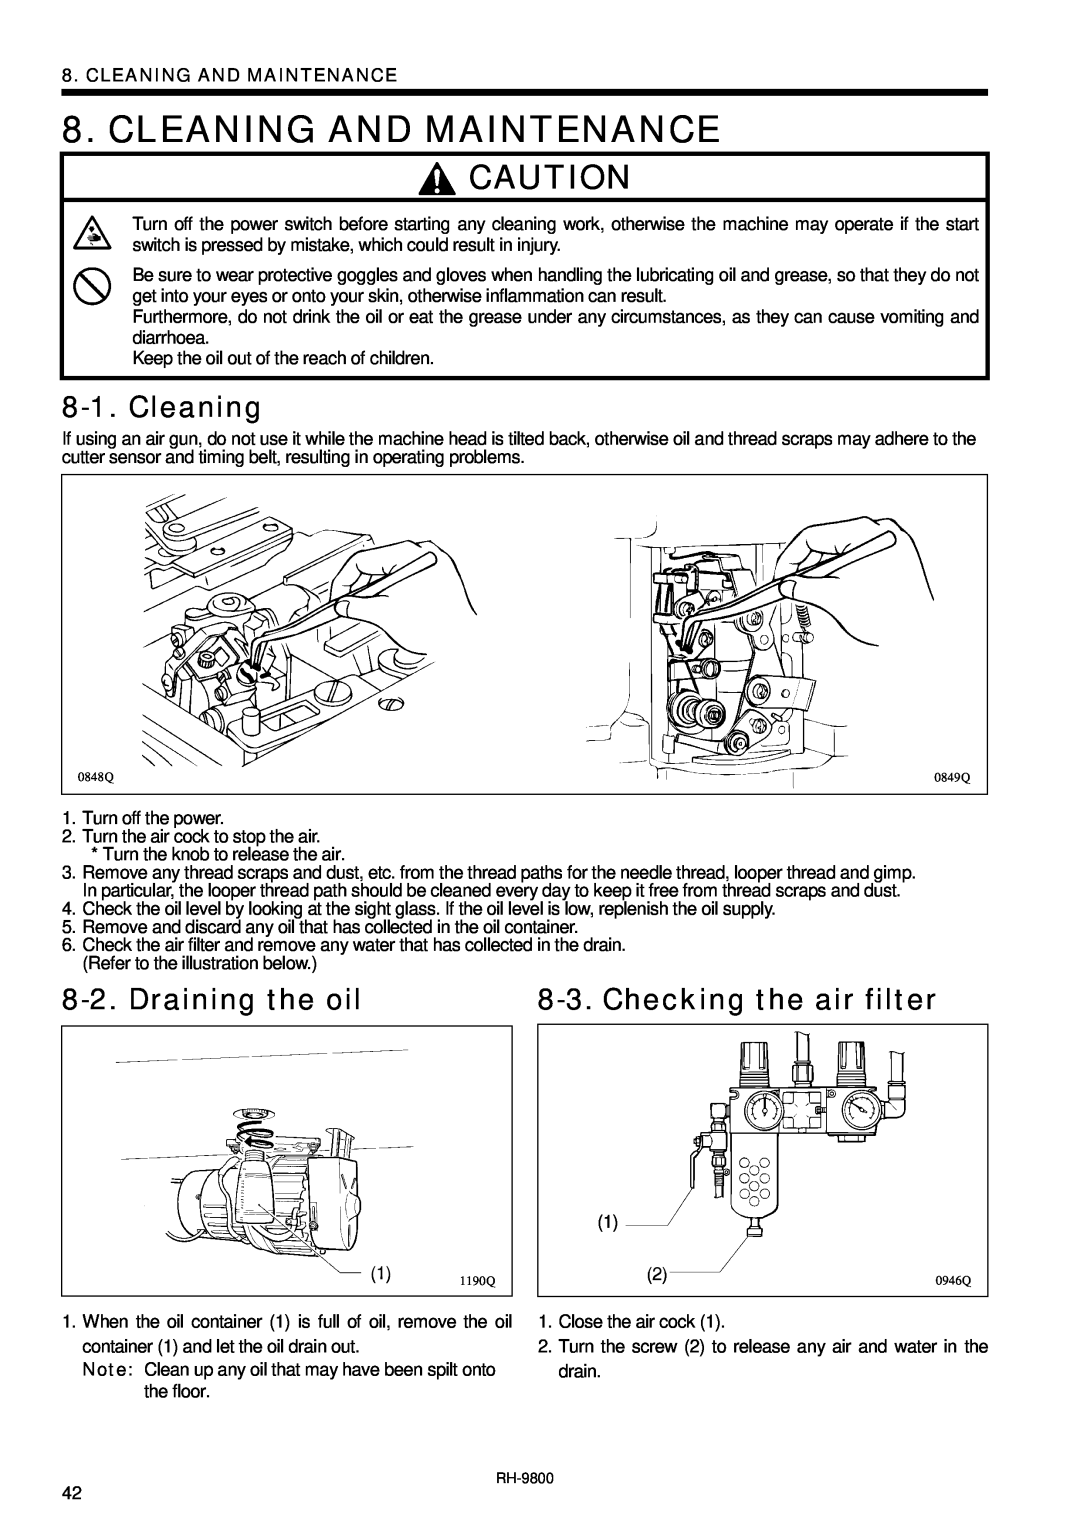 Brother DH4-B980 instruction manual Cleaning And Maintenance, Draining the oil, Checking the air filter 